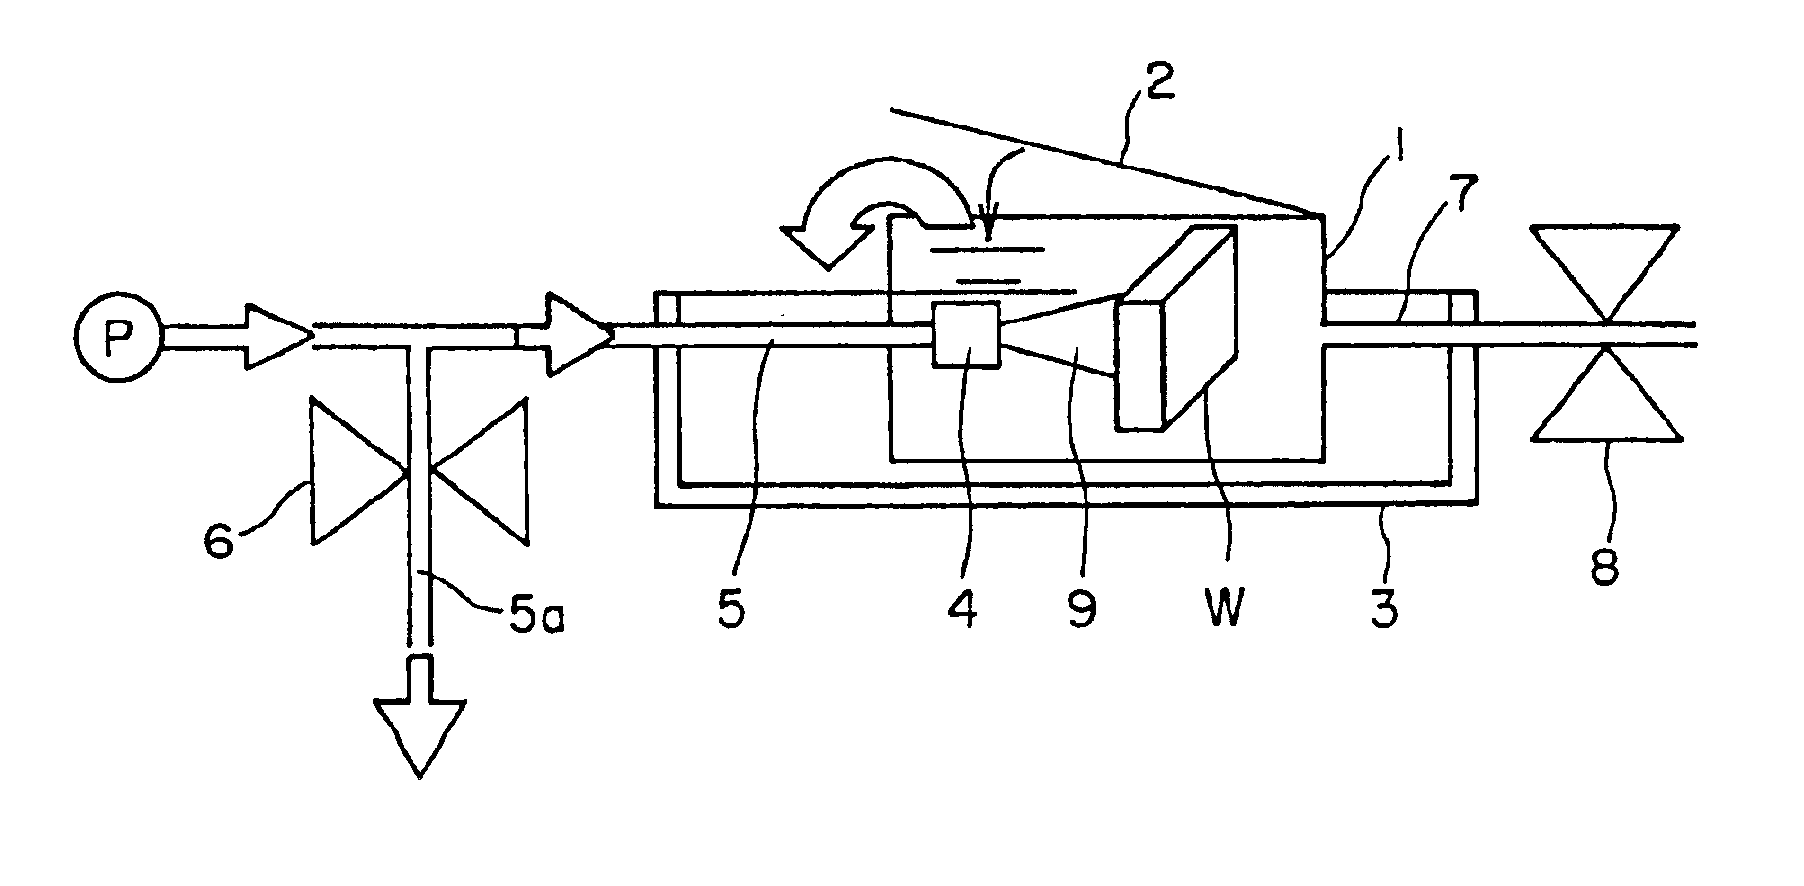 Method and devices for peening and cleaning metal surfaces